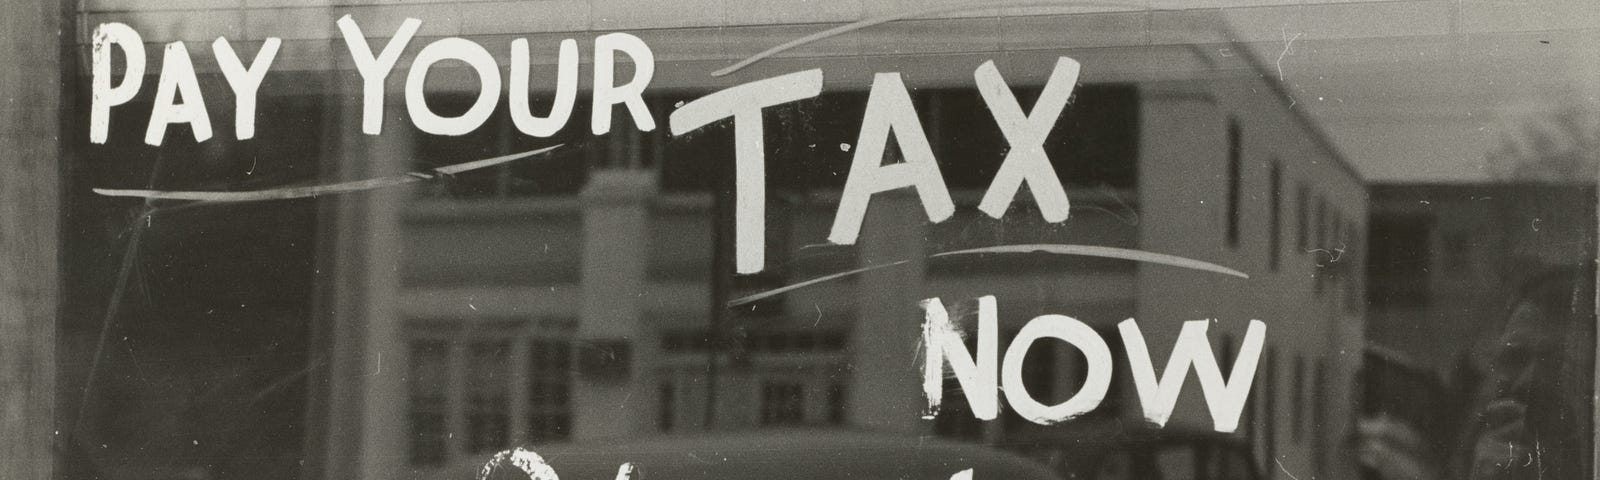 Pay your tax now here, a vintage sign painted on a window.